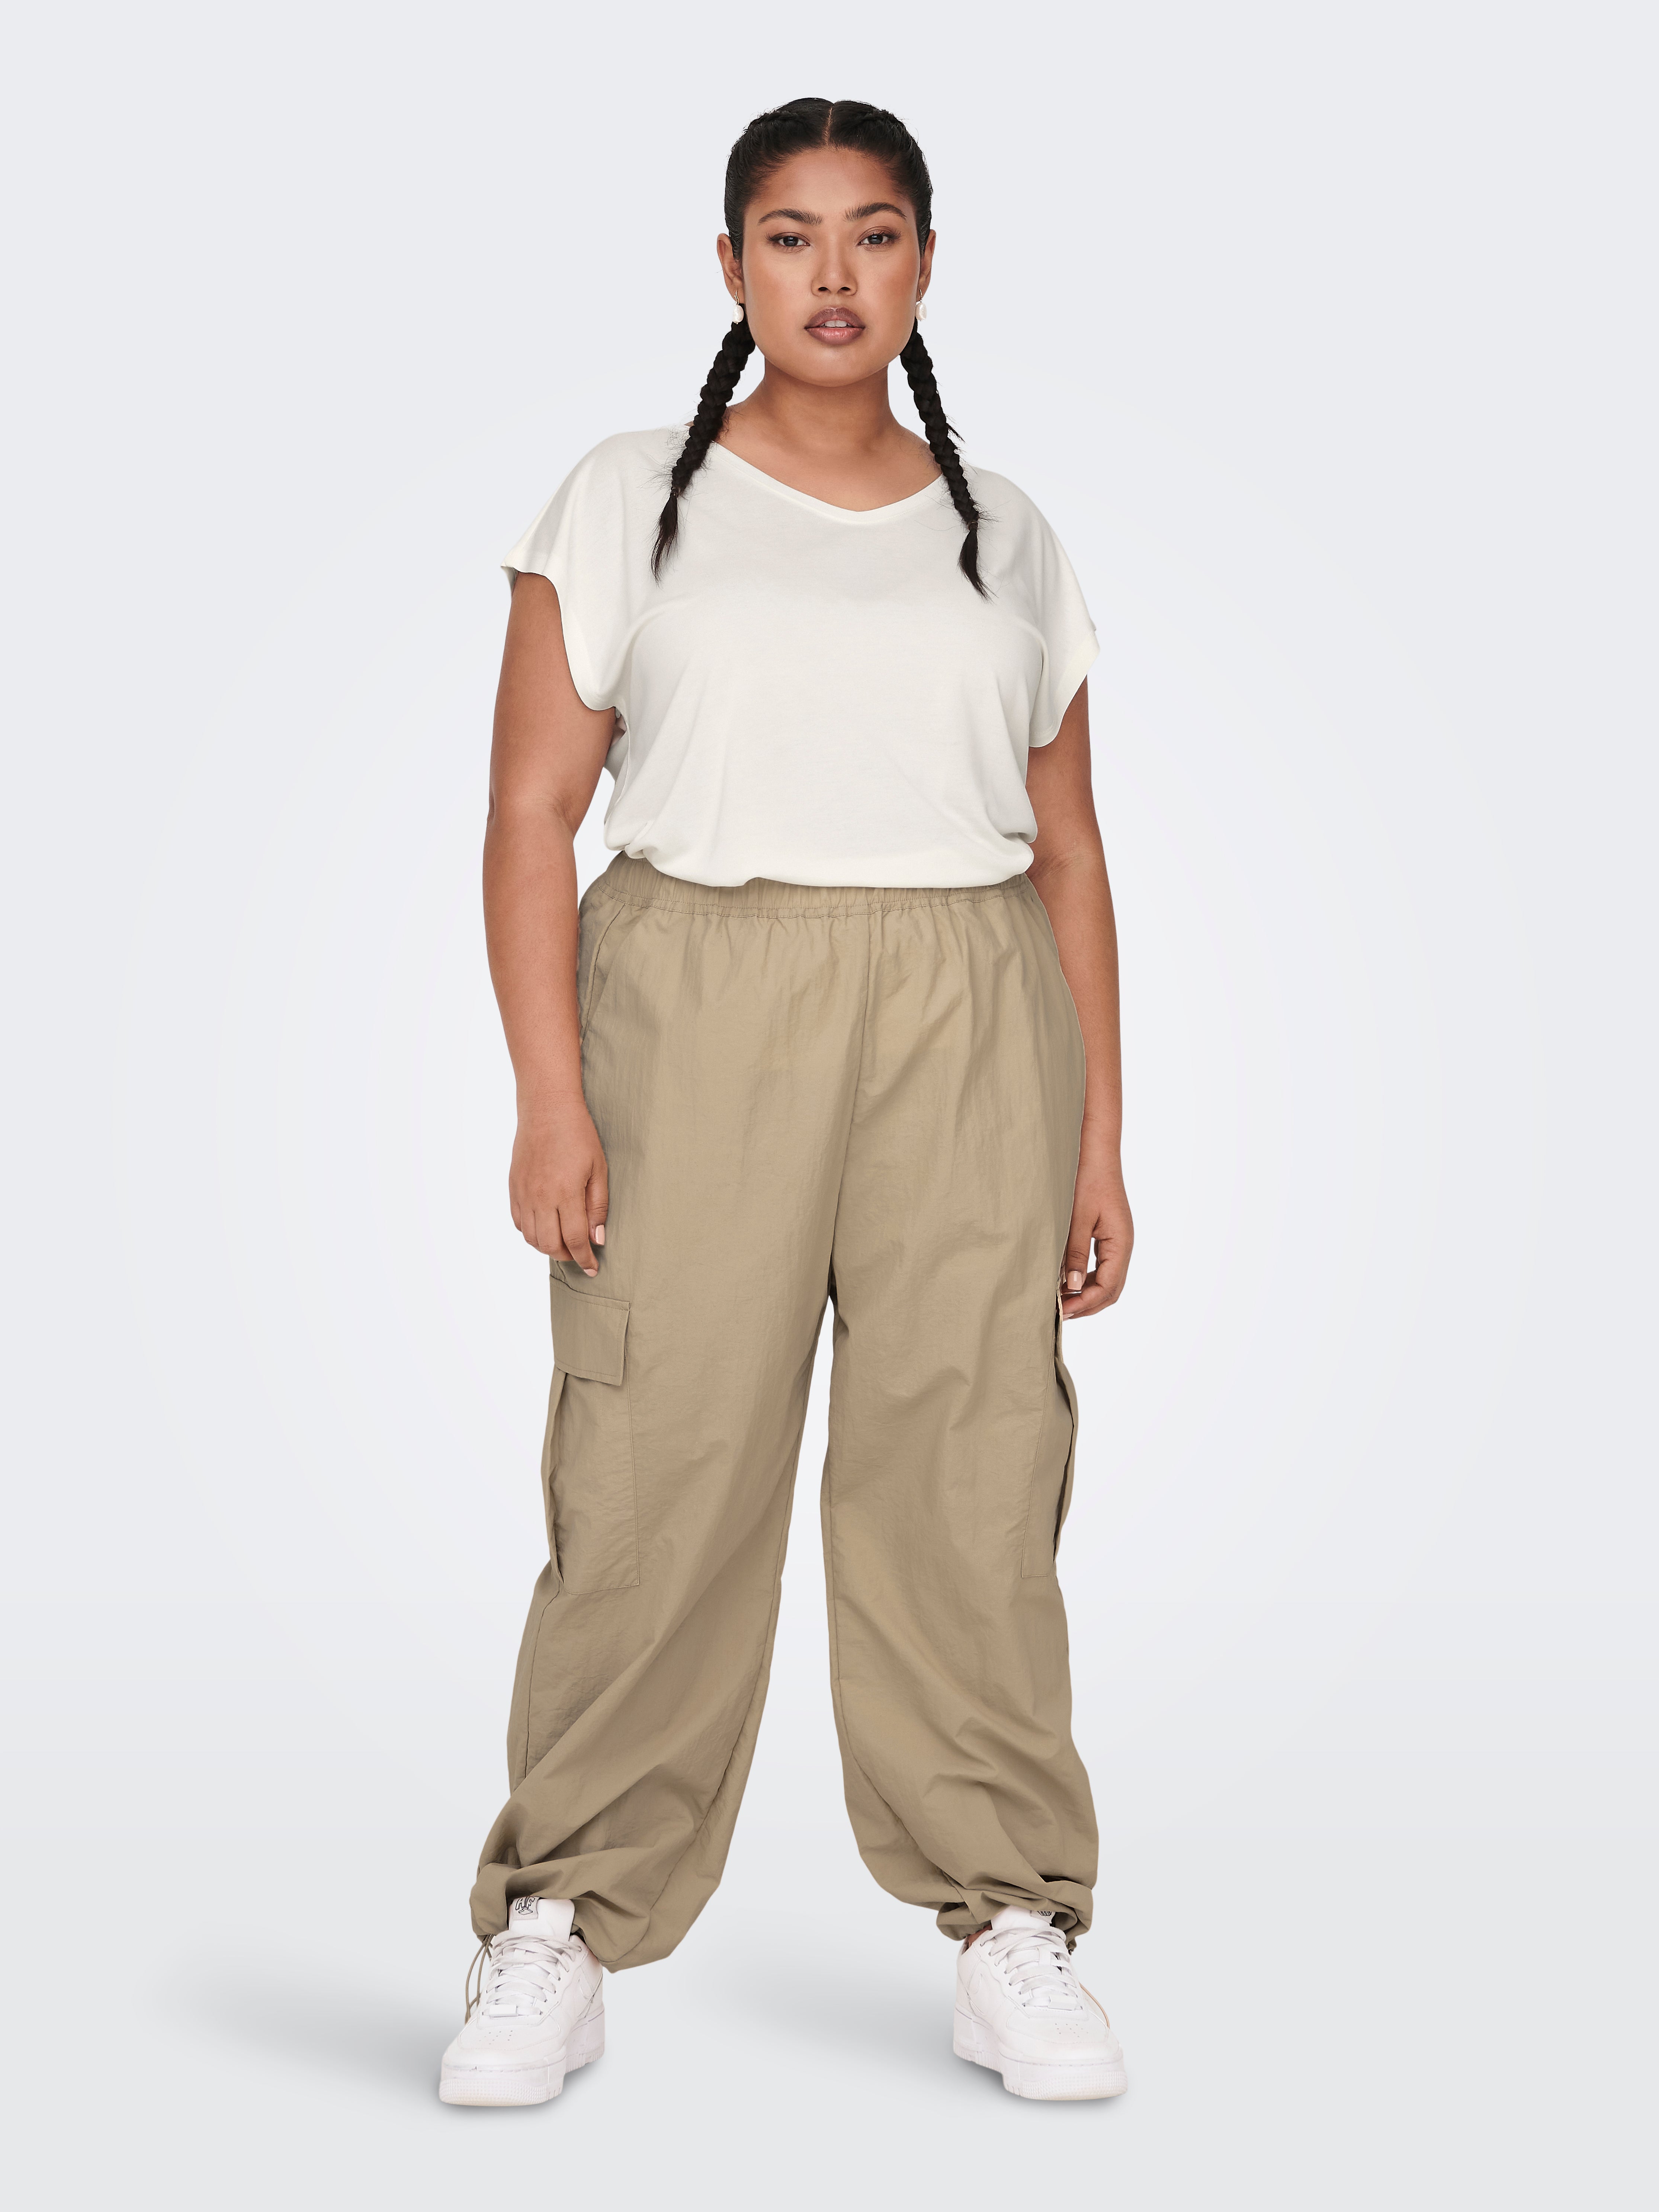 Buy The Souled Store Solids Light Beige Womens and Girls Regular Fit  Cotton Beige Color Women Cargo Pants at Amazonin